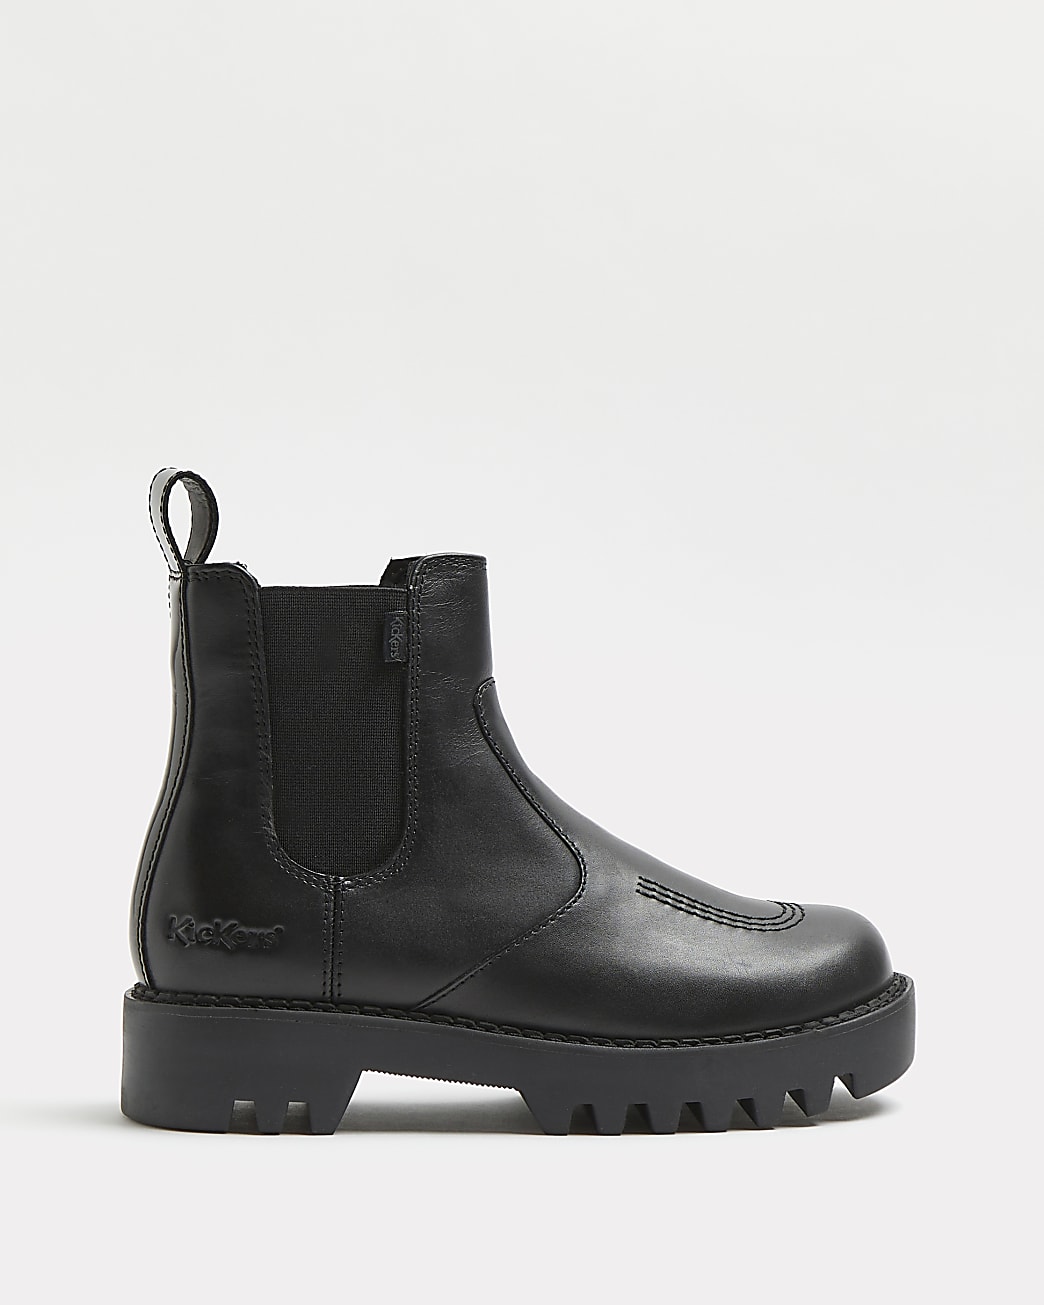 Kickers black leather boots